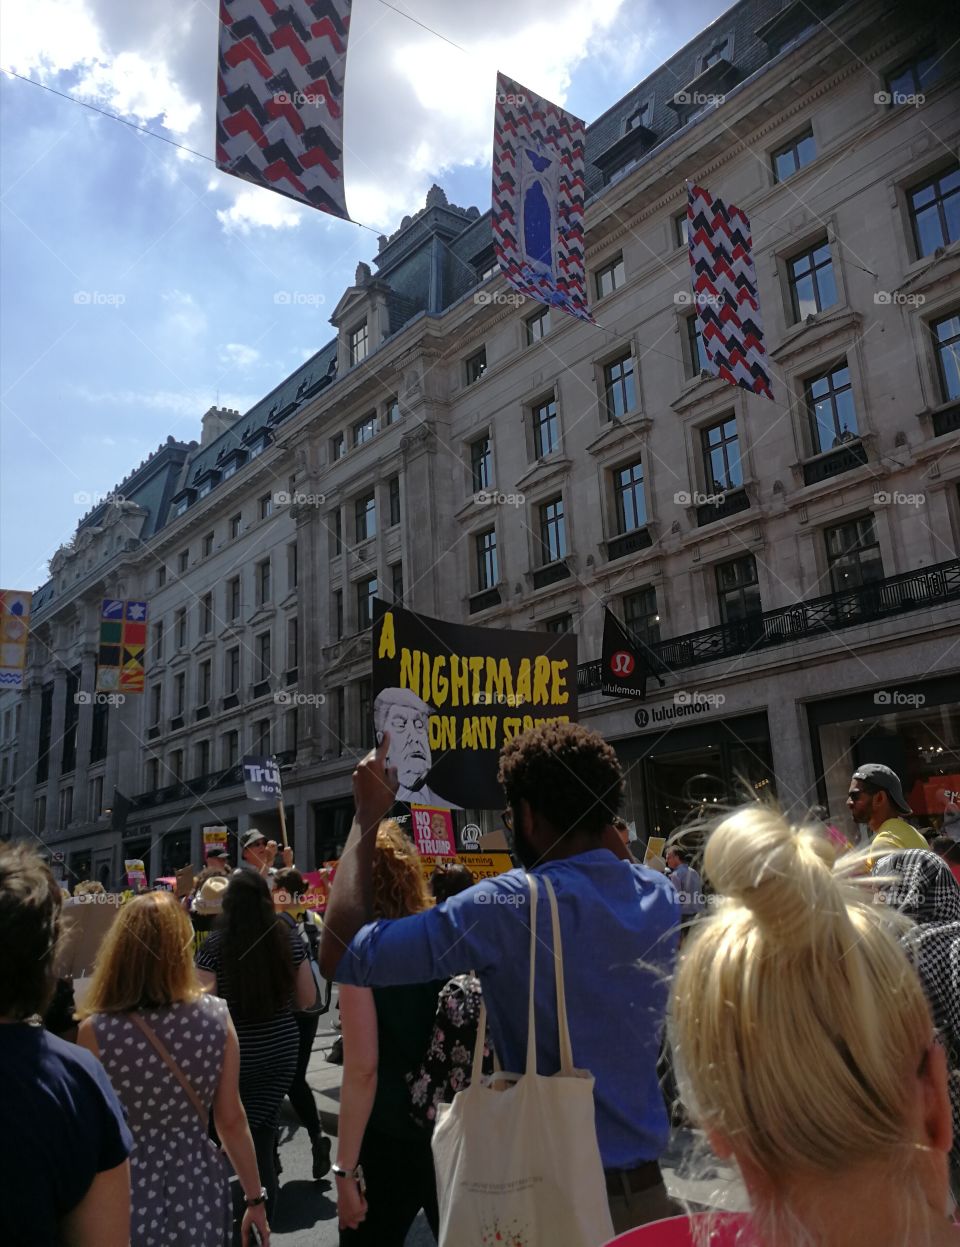 A Nightmare called trump , London March, 13 July 2018